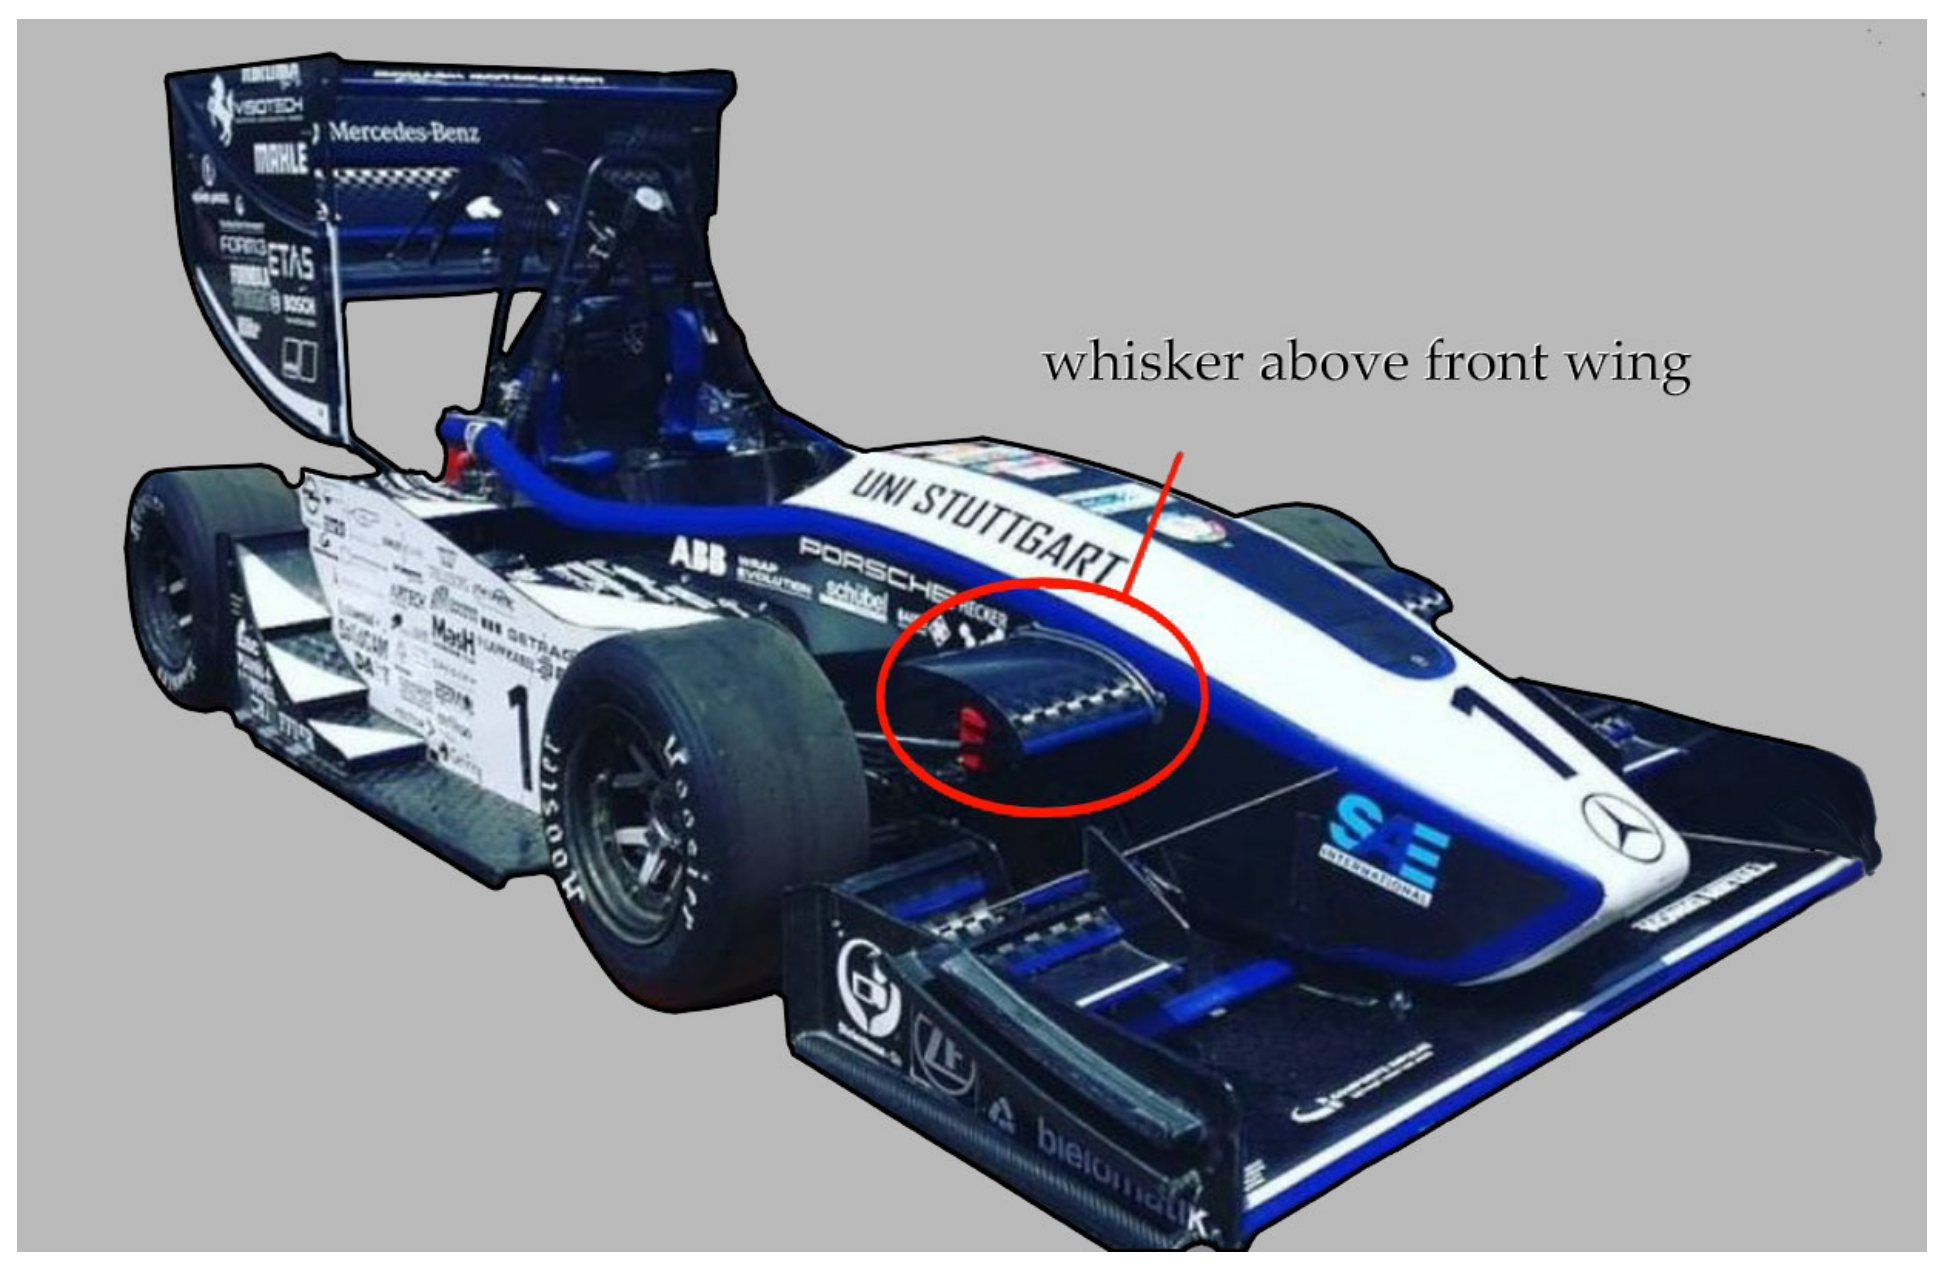 Critical Electronic Components in Formula 1 Race Cars